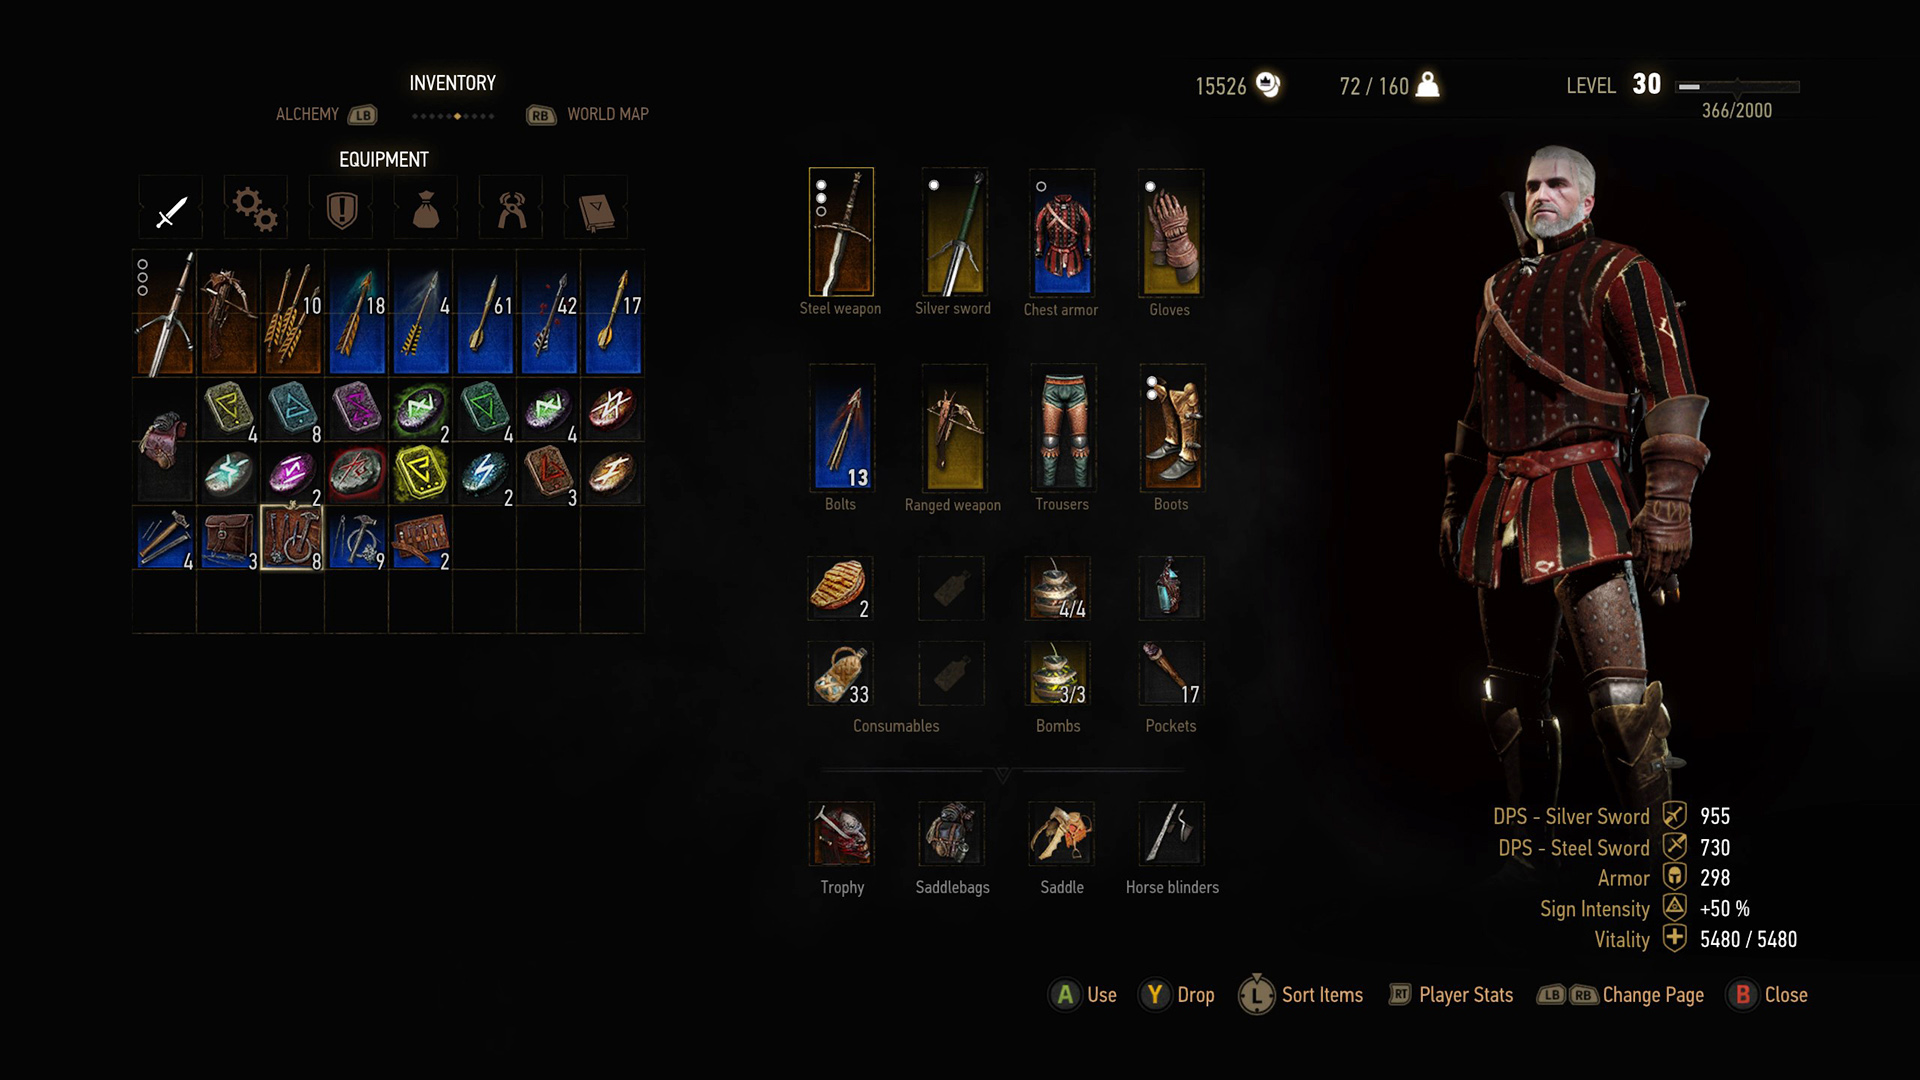 The_Witcher_3_Wild_Hunt_Inventory_OLD_RGB.jpg